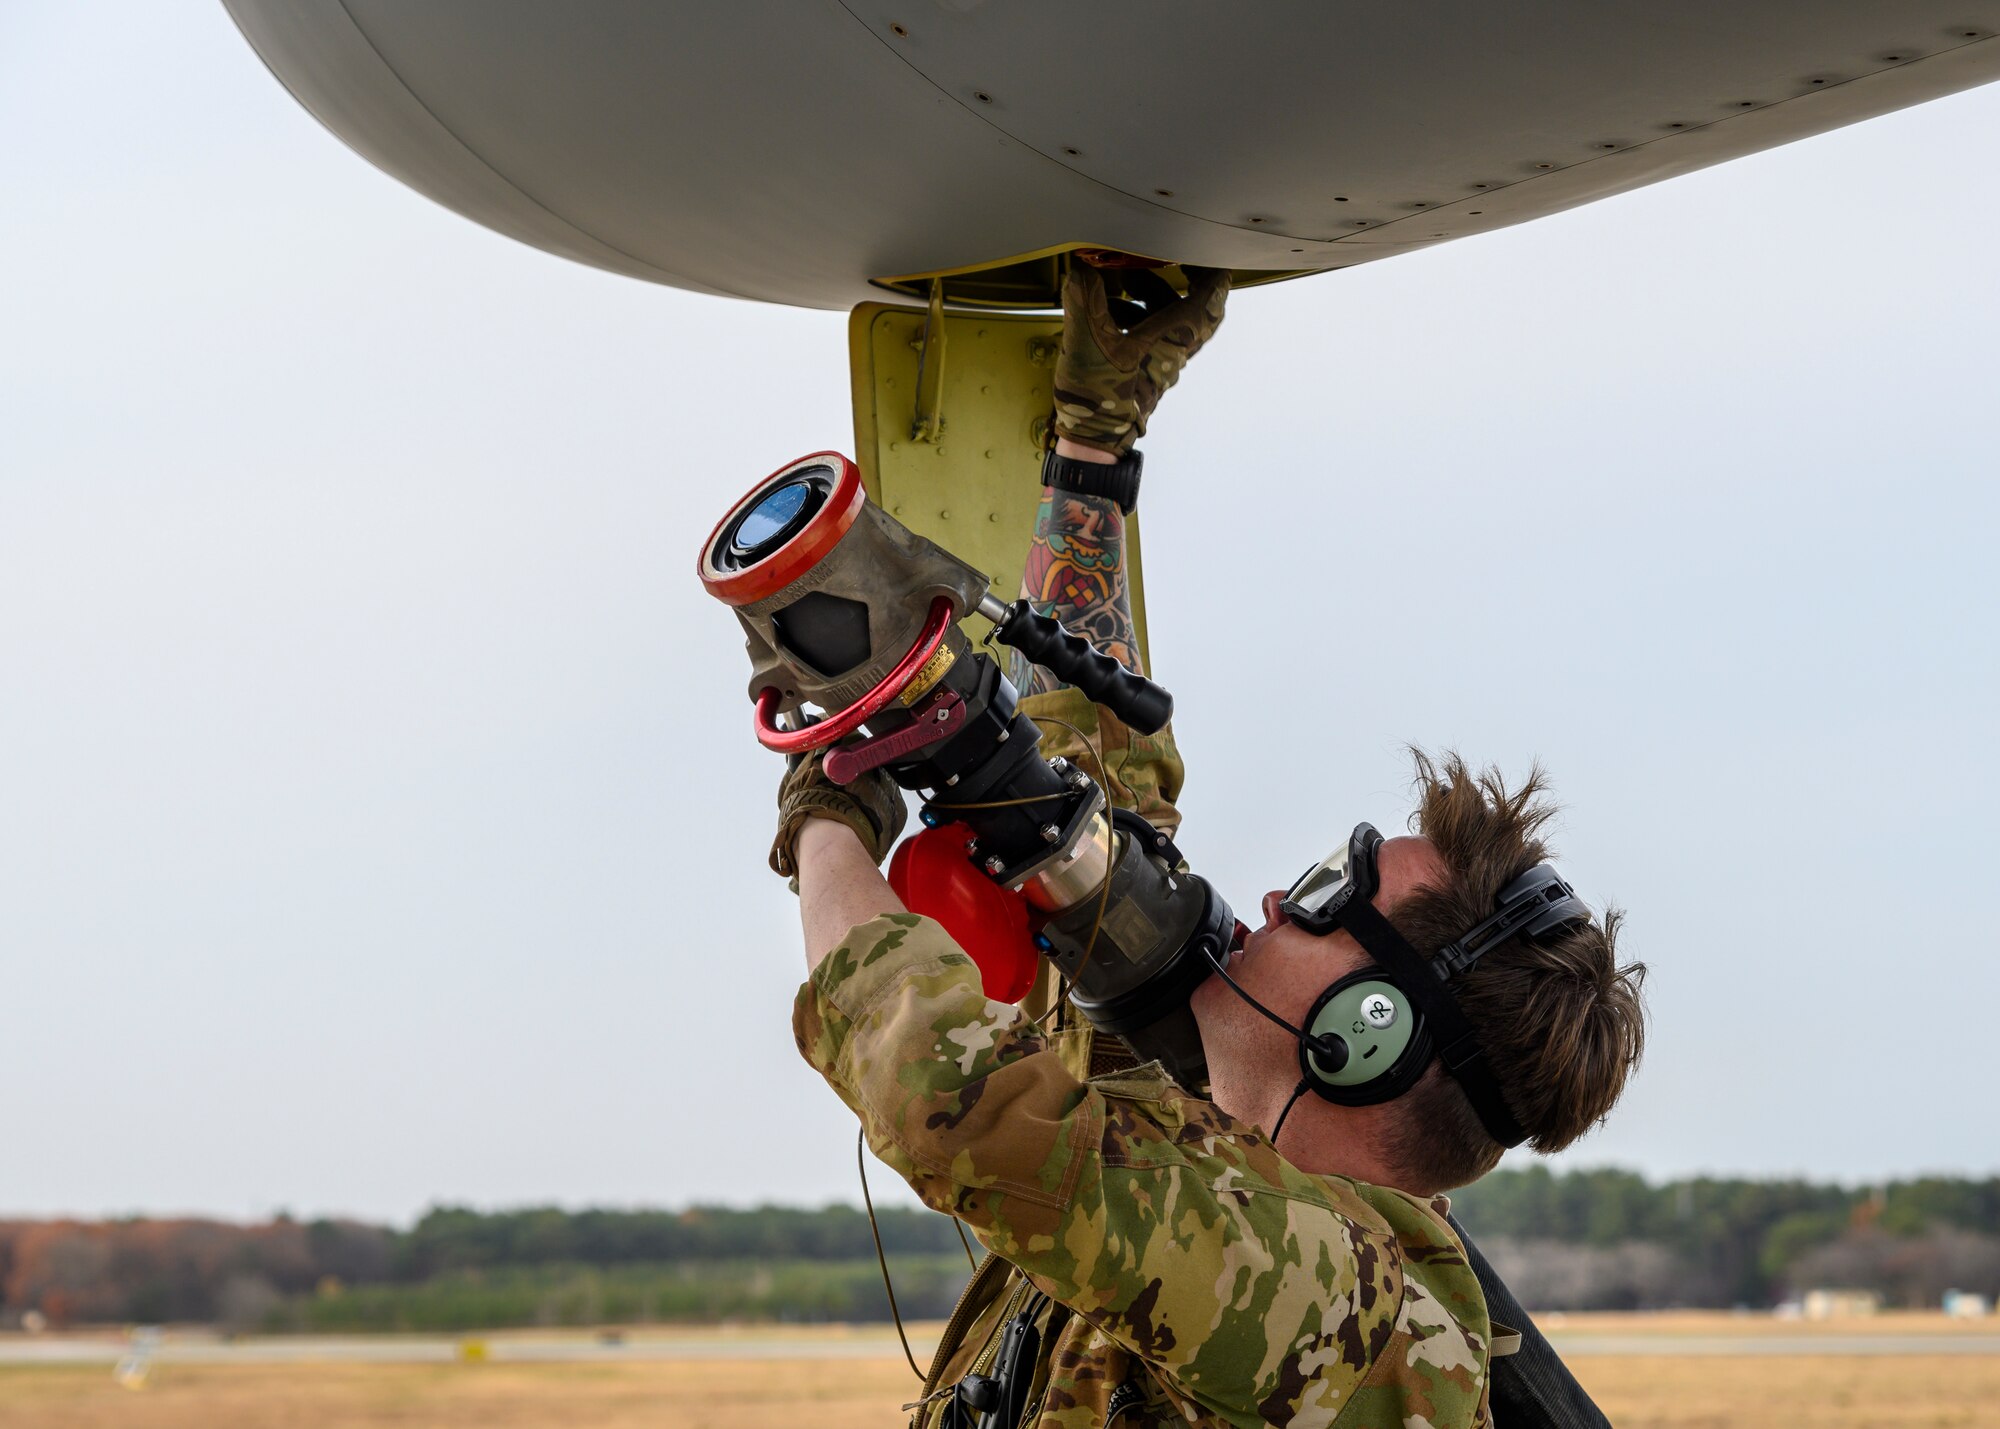 A U.S. Airman with the 1st Special Operations Squadron from Kadena Air Base, Japan, unhooks the fuel hose during a forward area refueling point (FARP) training at Misawa Air Base, Japan, Nov. 18, 2020. FARP plays a role in the U.S. military’s adaptive basing abilities to deliver airpower and lethality more efficiently anywhere in the world by being able to provide a mobile refueling point anywhere an aircraft can land. (U.S. Air Force photo by Airman 1st Class China M. Shock)